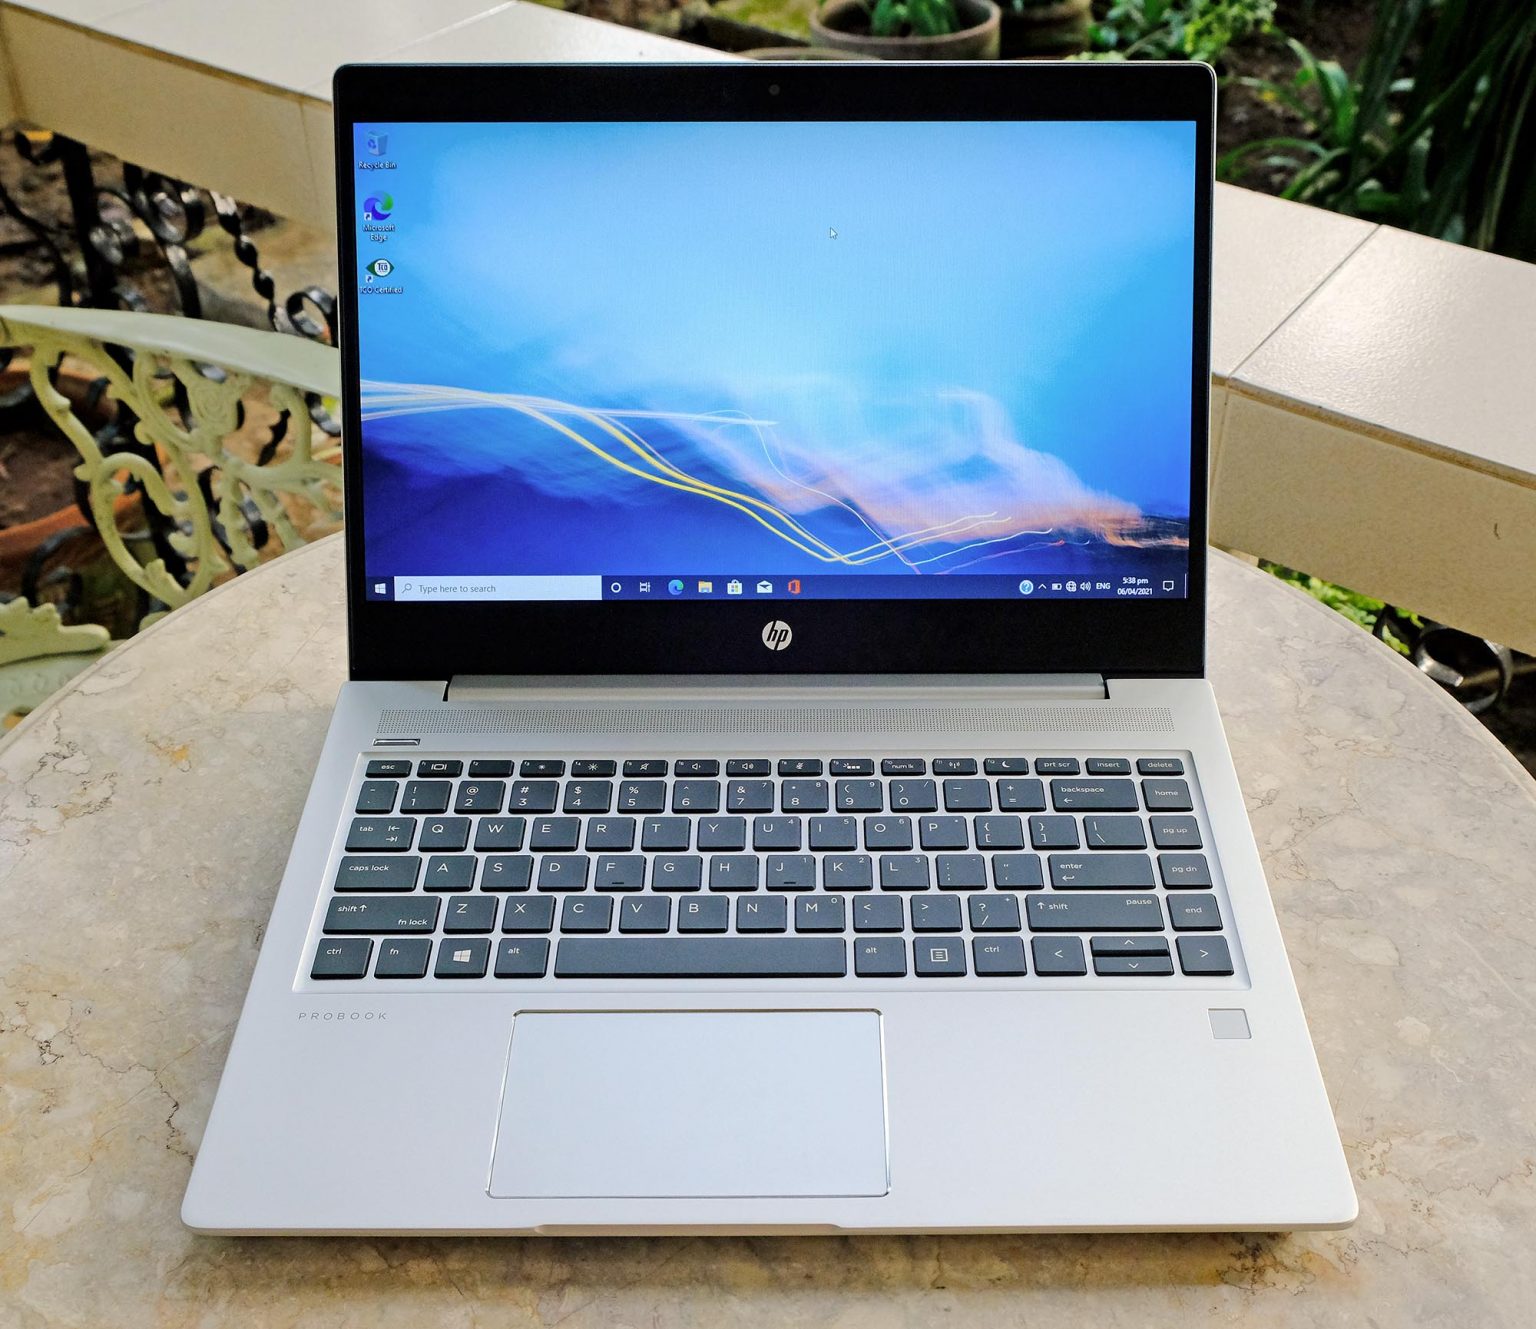 Review HP ProBook 445 G7 Notebook PC Features, Photos, Full